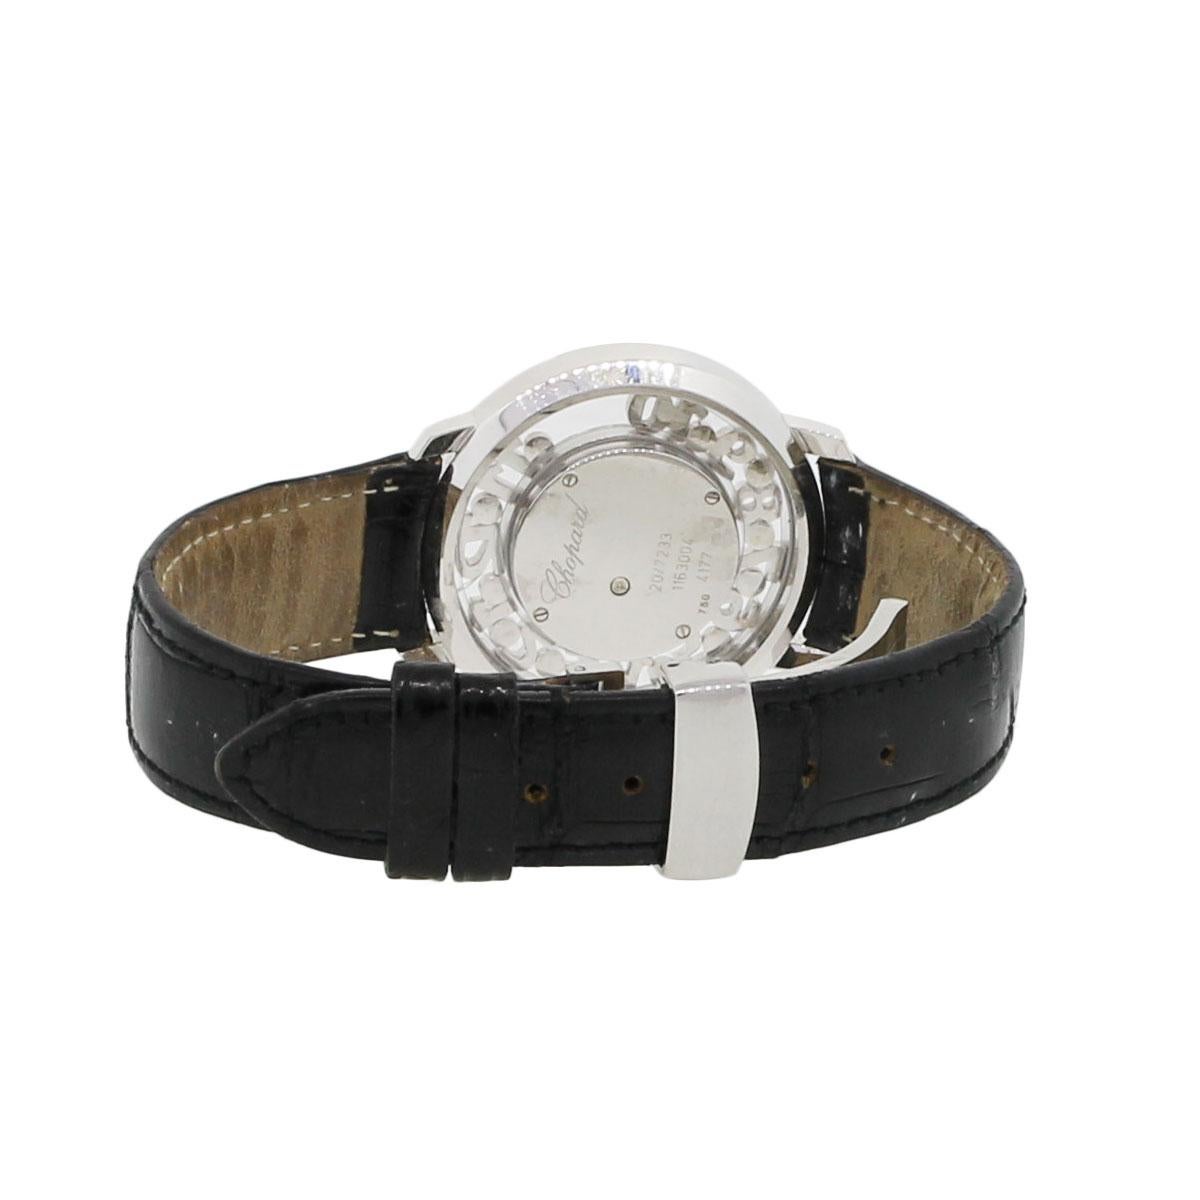 Brand: Chopard
Model: Happy Diamonds
Item #: 20/7233
Case Material: 18K White Gold
Case Diameter: 39mm
Bracelet: Black Leather
Dial: Mother of Pearl
Bezel: 12 Floating Numbers and 12 Floating Diamonds
Crystal: Scratch Resistant Sapphire
Size: